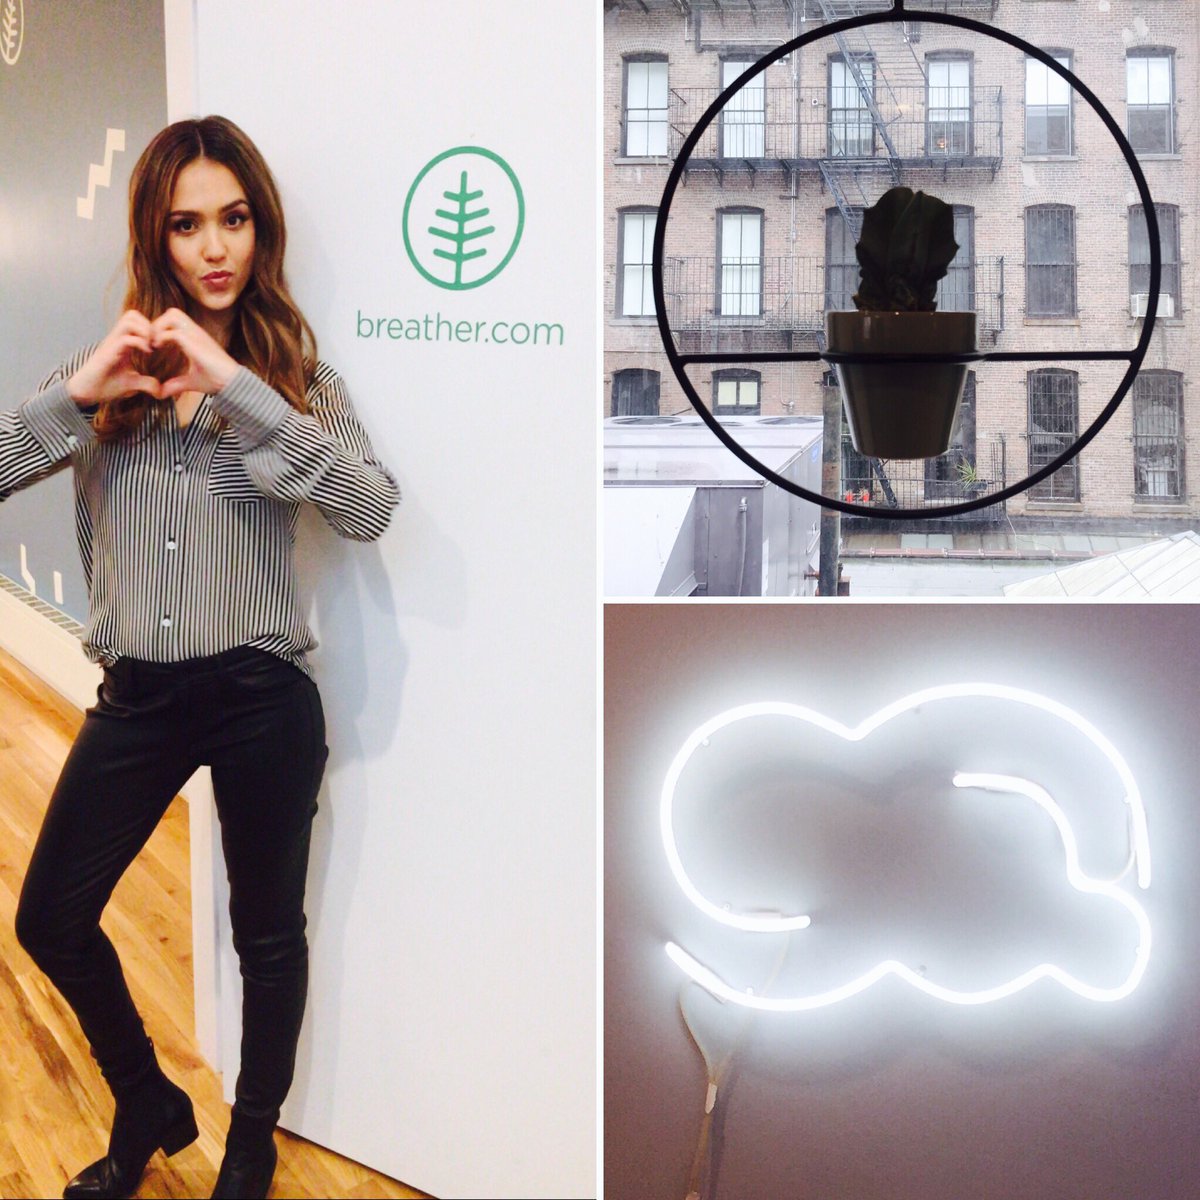 Love getting it all done at @breather in NYC today! Perfect for working, meeting and dreaming... https://t.co/l1KkEfv2uo